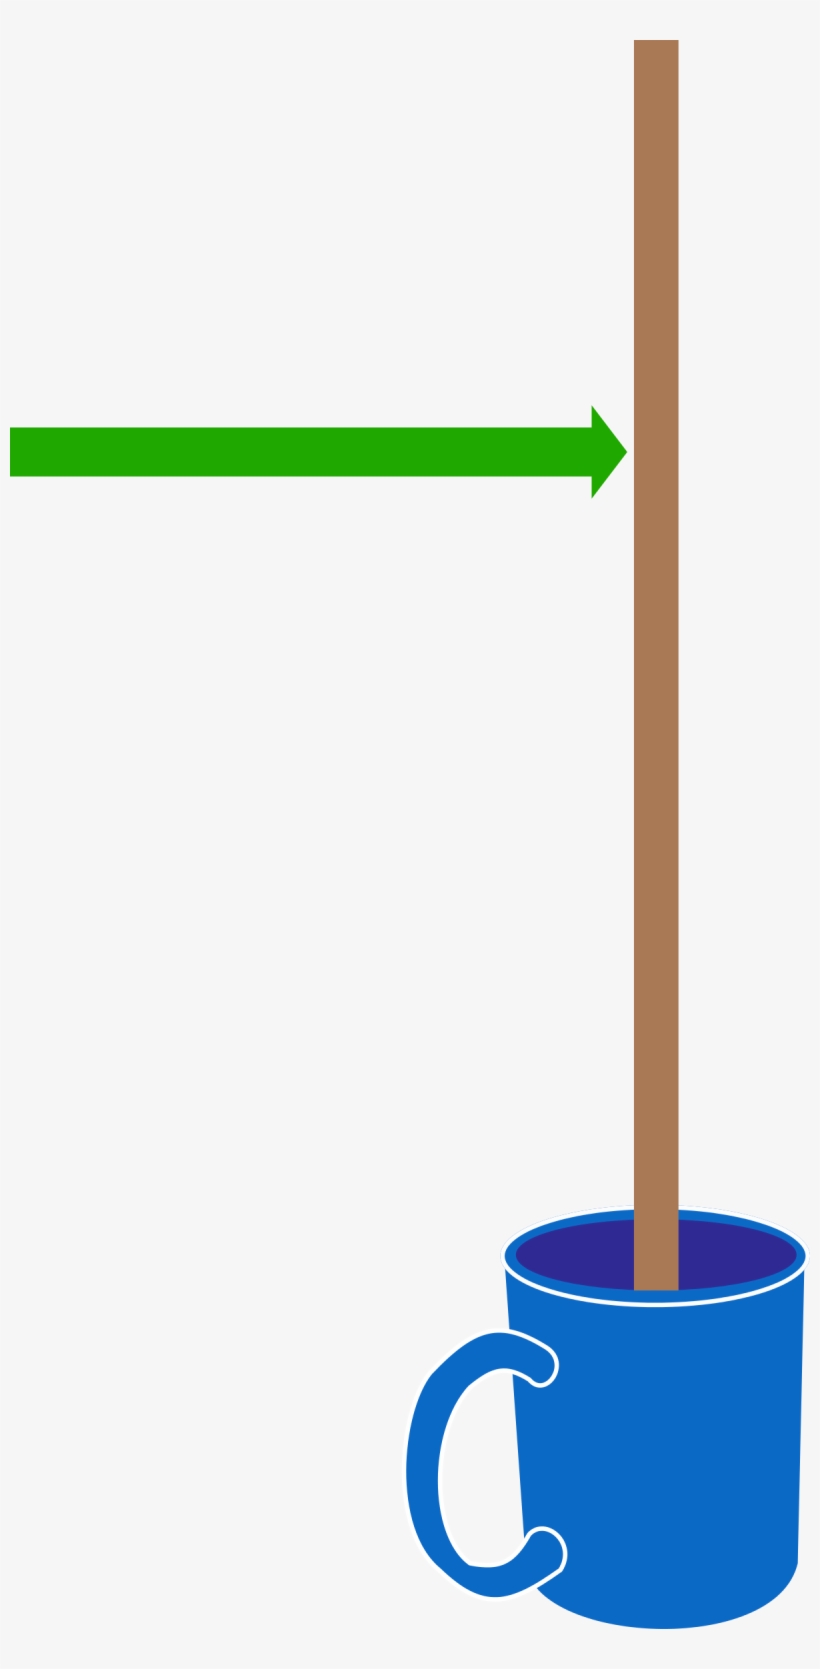 A Wooden Stick Of Length ℓ ℓ Is Balanced Vertically, transparent png #8406538